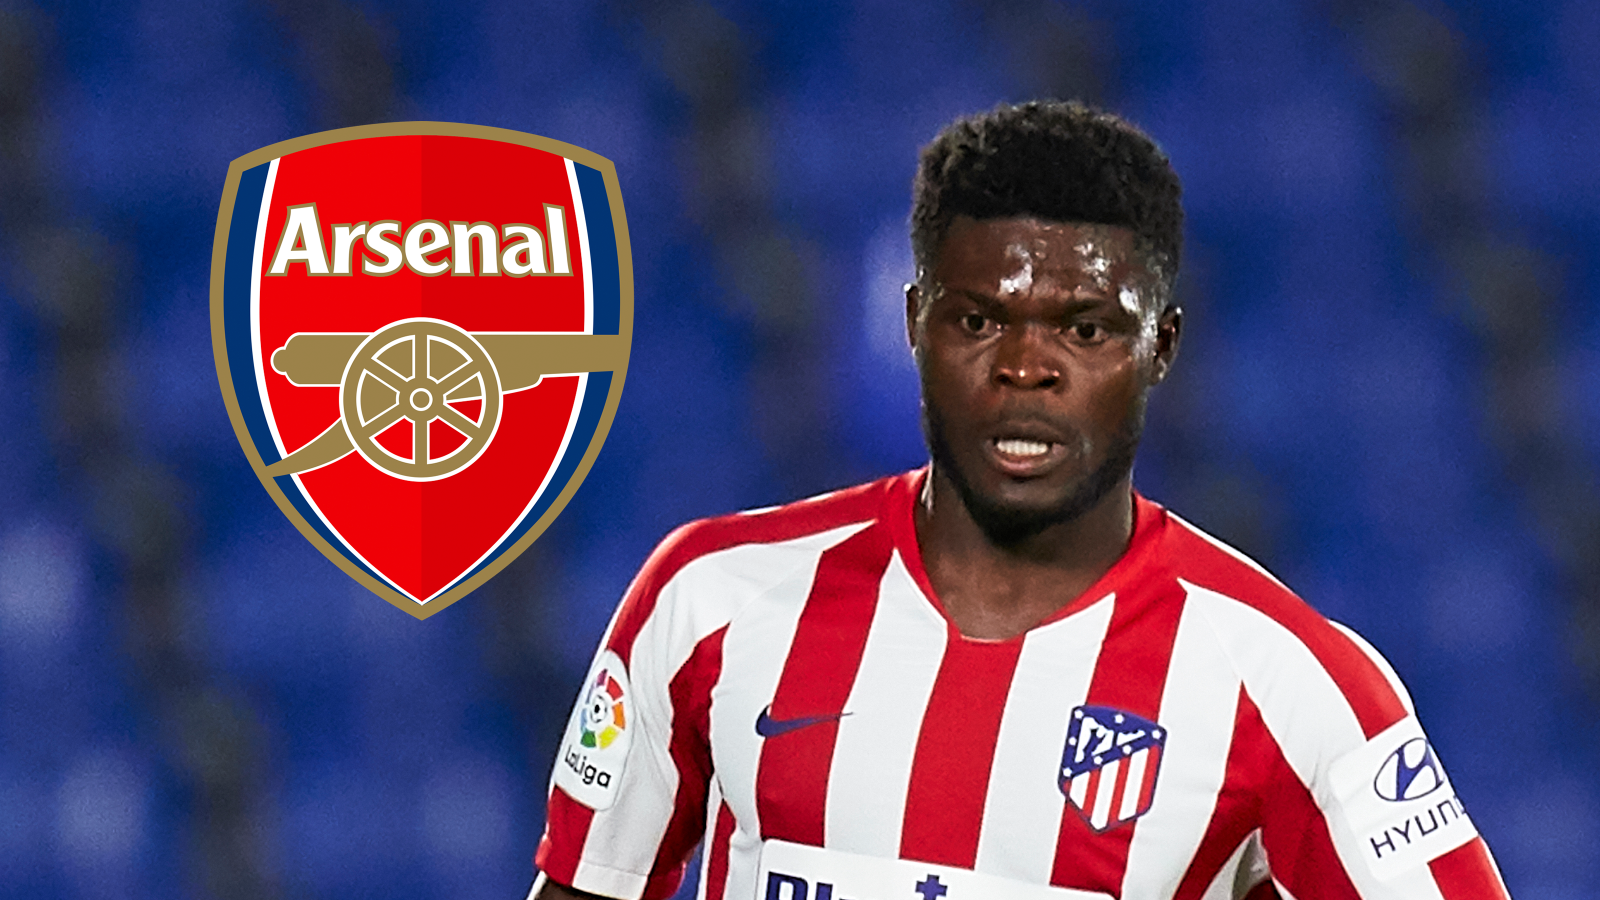 Arsenal complete £45 million signing of Partey as Torreira heads